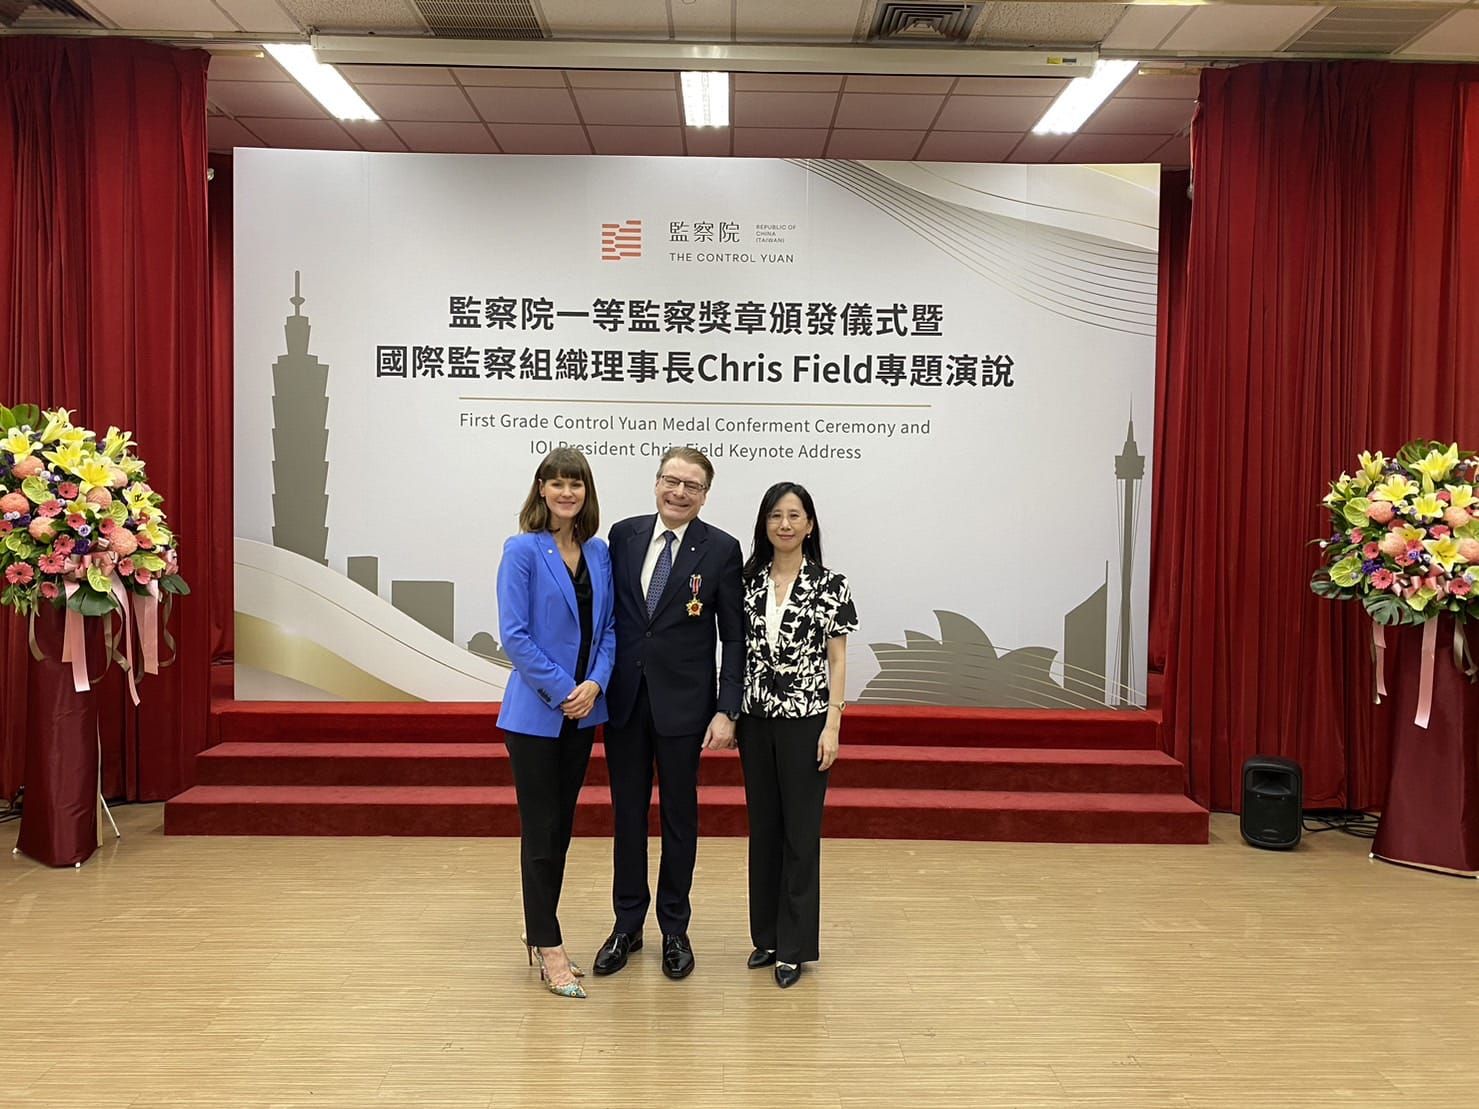 Left to right: Rebecca Poole, Chief of Staff to the IOI President; IOI President Chris Field PSM; and Doris Lin-Ling Uang, Director General, Dept. of Coordination and Planning, Control Yuan